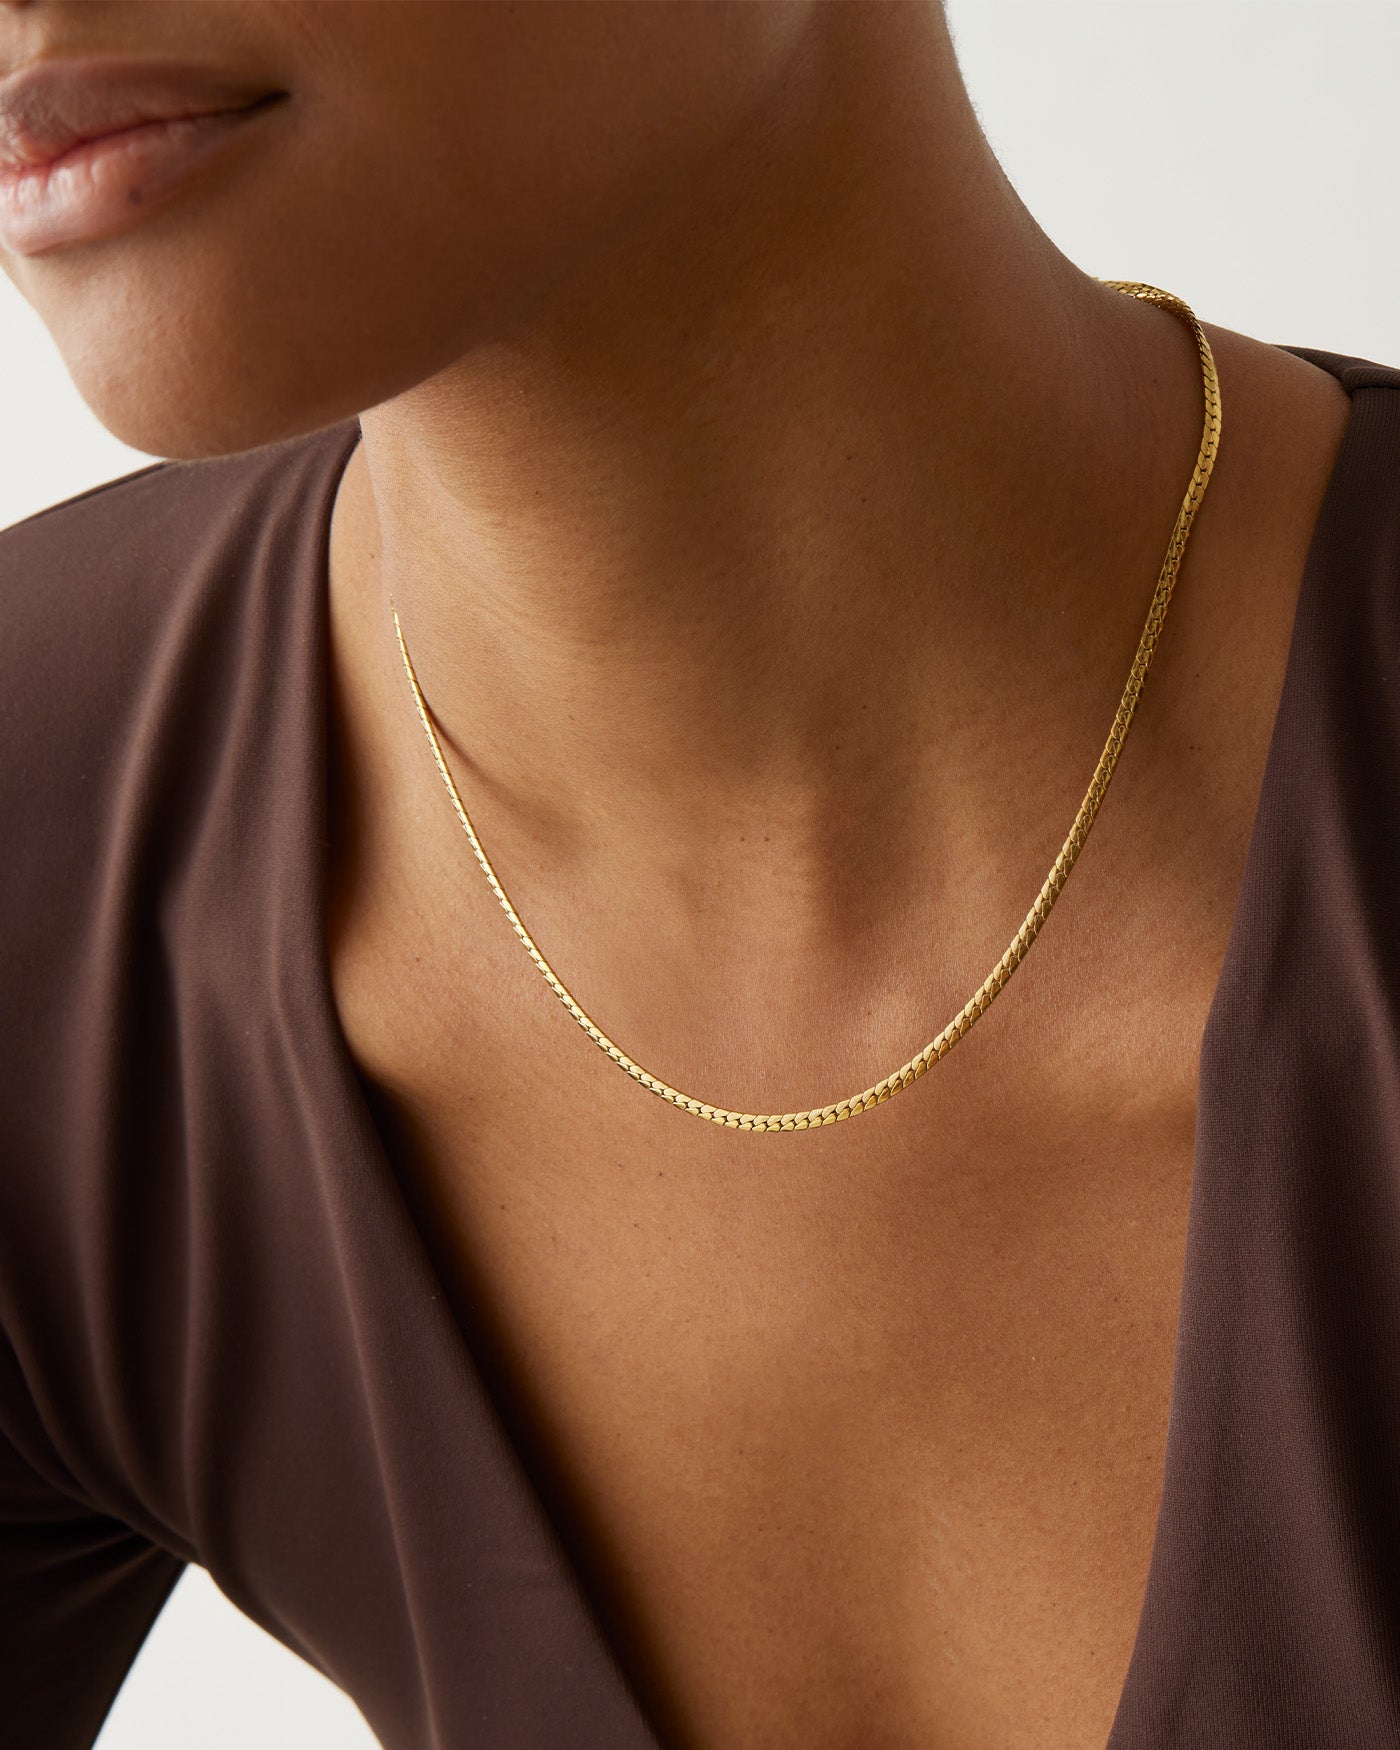 1.0mm Solid Snake Chain Necklace in 14K Gold - 20